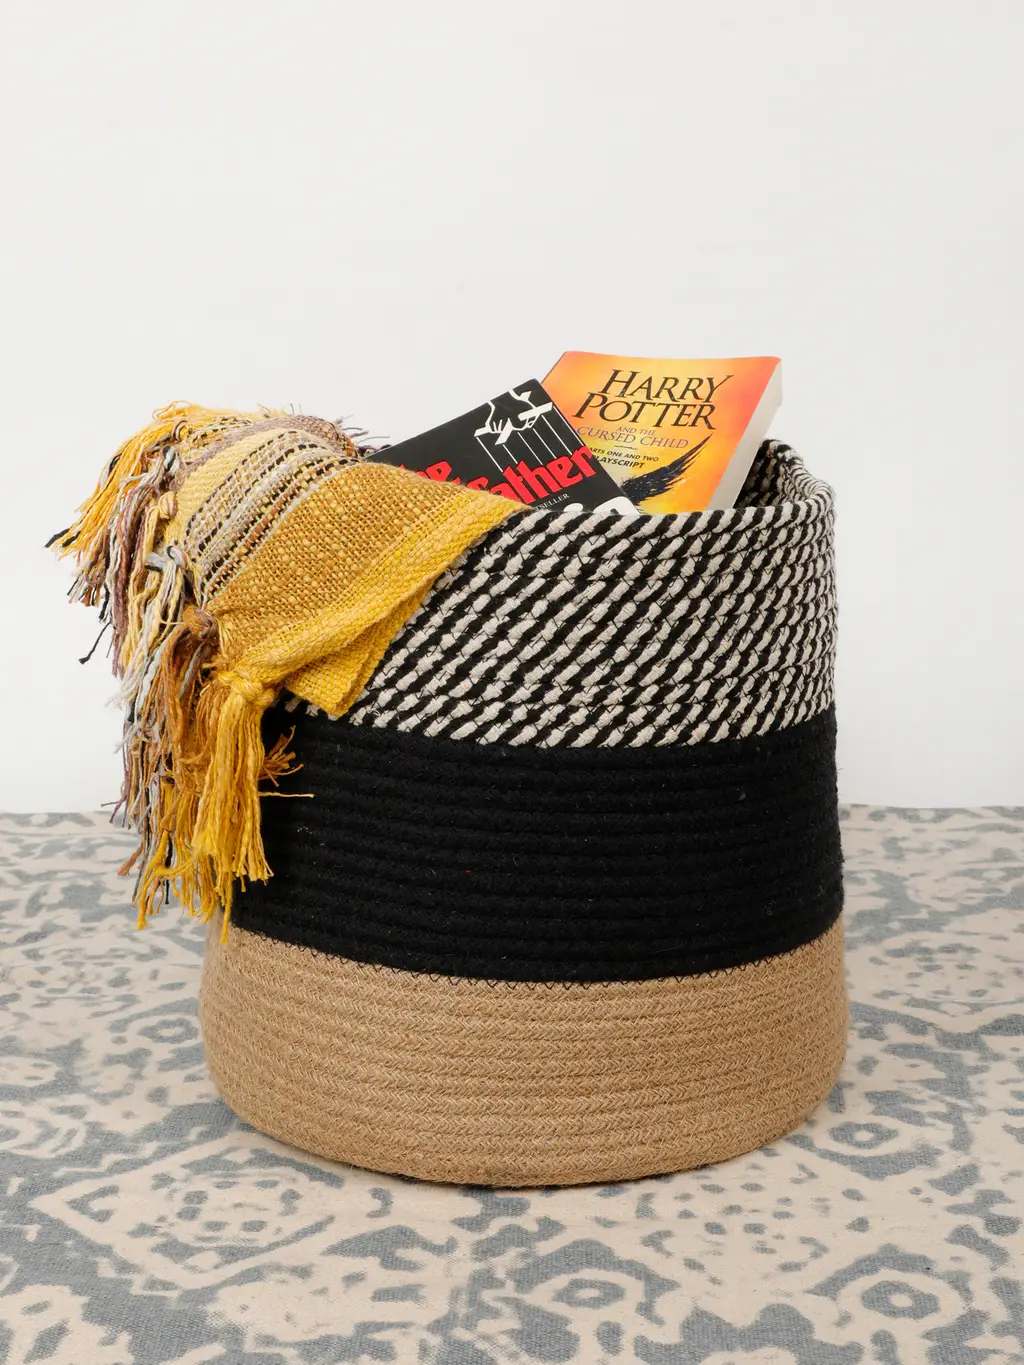 Jute Cotton Basket, Tri Band, Patch, Zigzag, 12 Inches